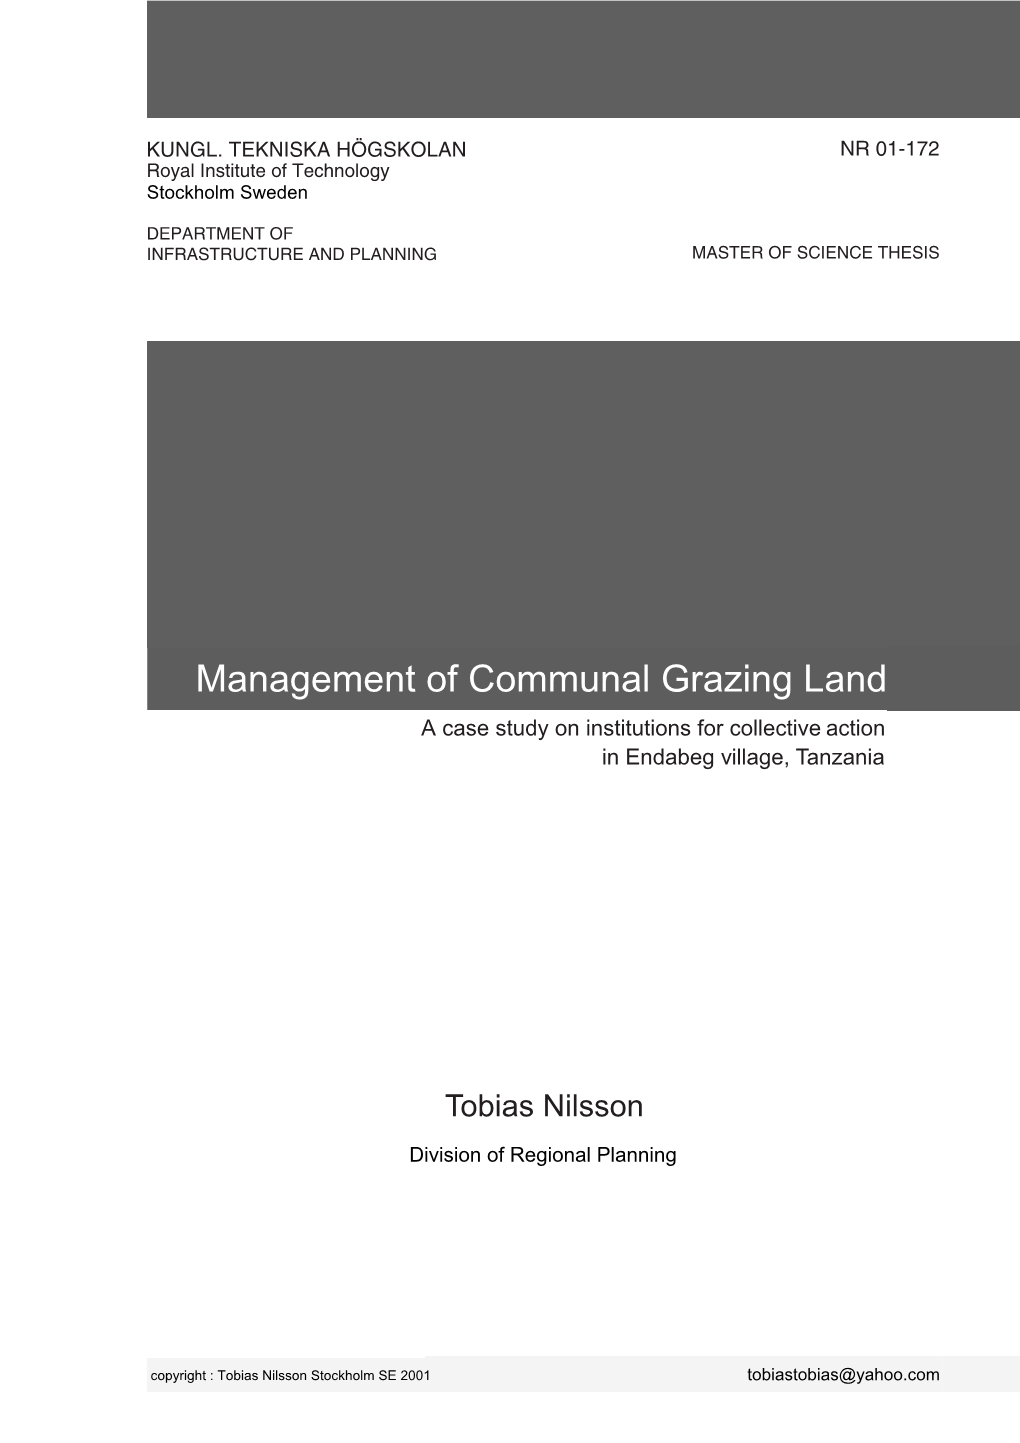 Management of Communal Grazing Land a Case Study on Institutions for Collective Action in Endabeg Village, Tanzania